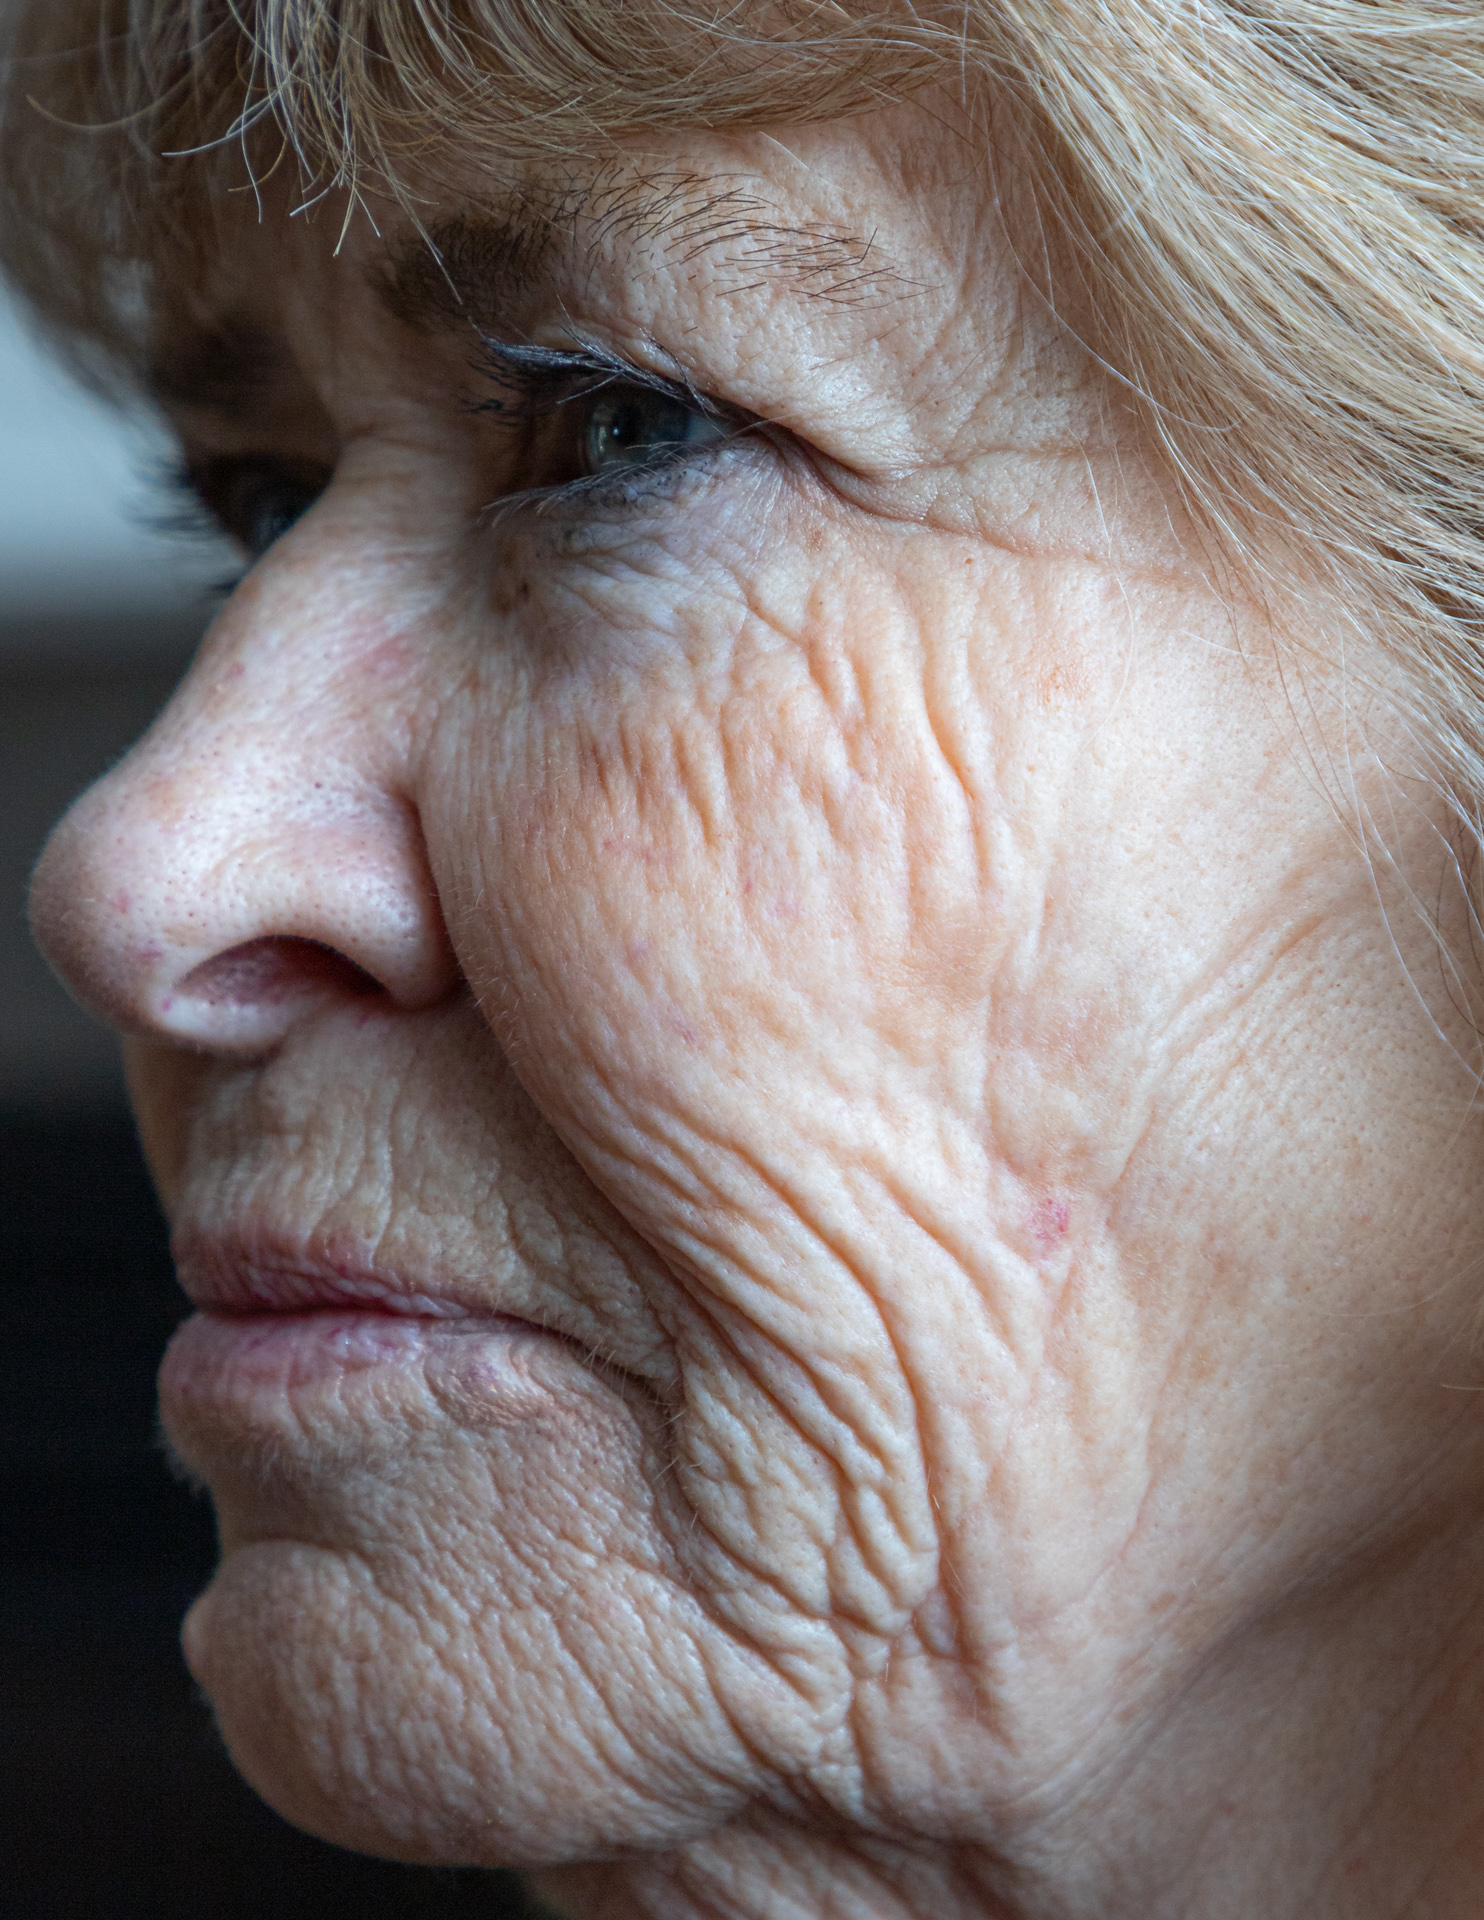 A close up of a person's profile of their face, a strong emphasis on their wrinkles and various textures of their face